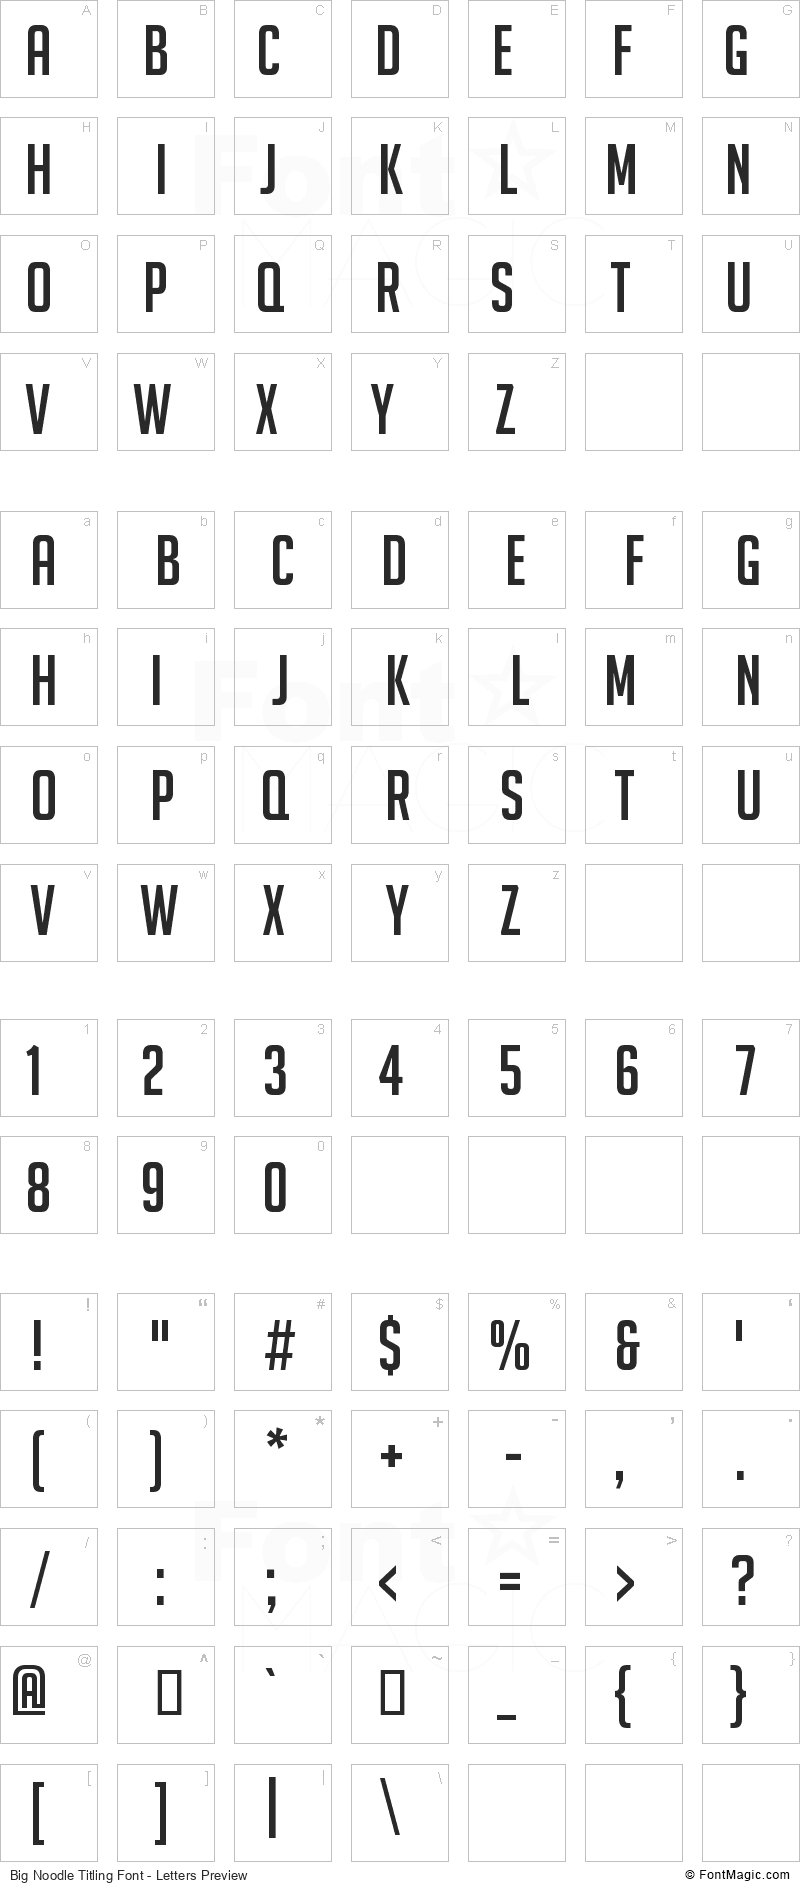 Big Noodle Titling Font - All Latters Preview Chart